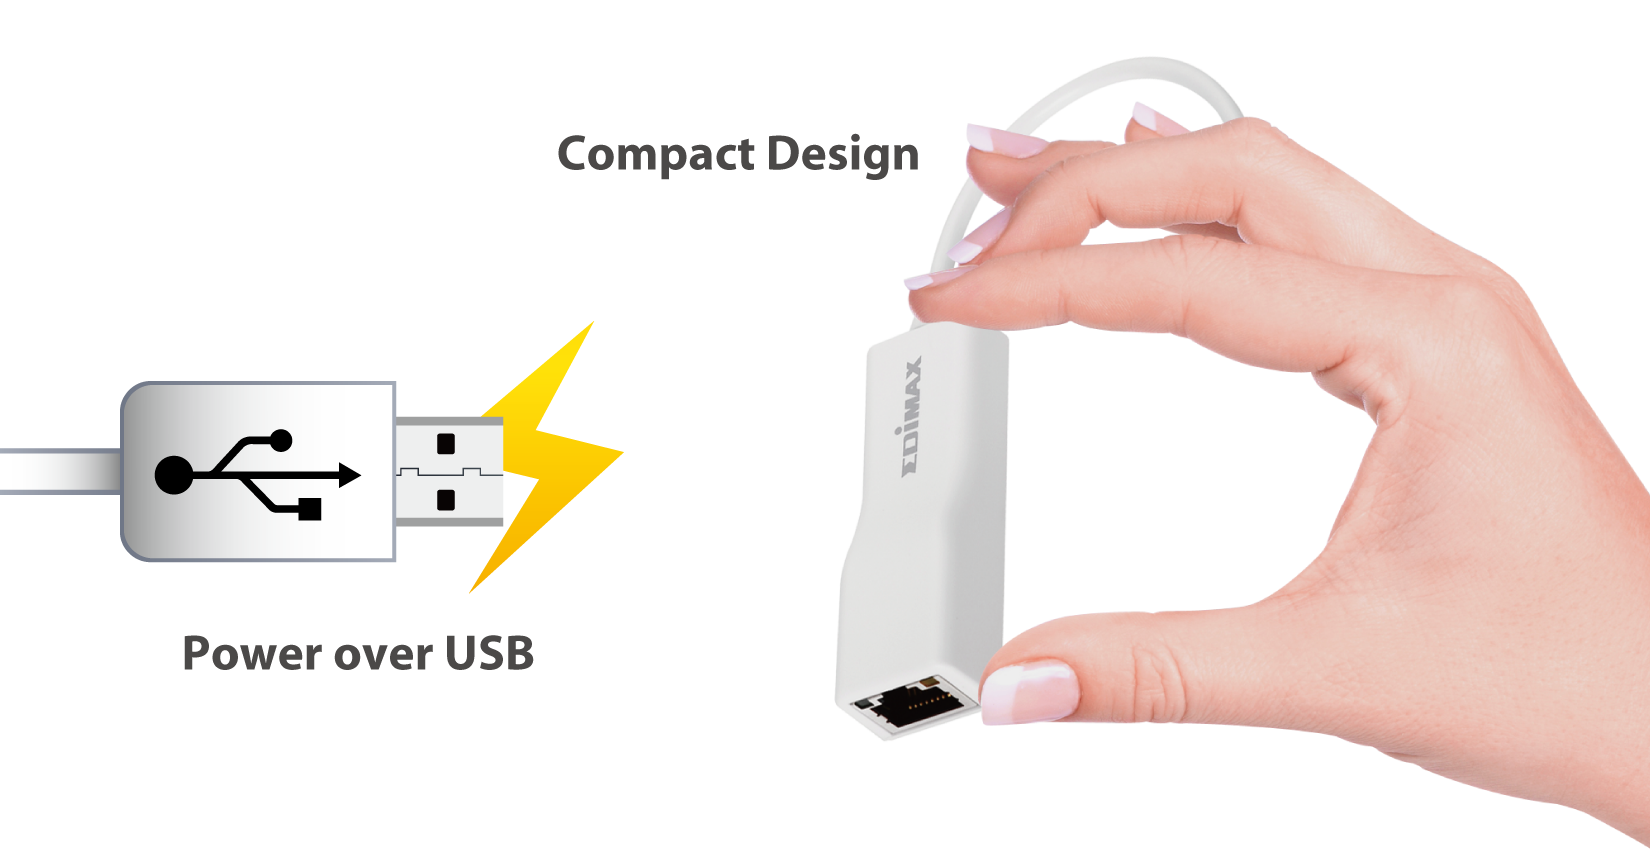 Edimax USB 2.0 Fast Ethernet Adapter EU-4208_compact_design_power_over_USB.png